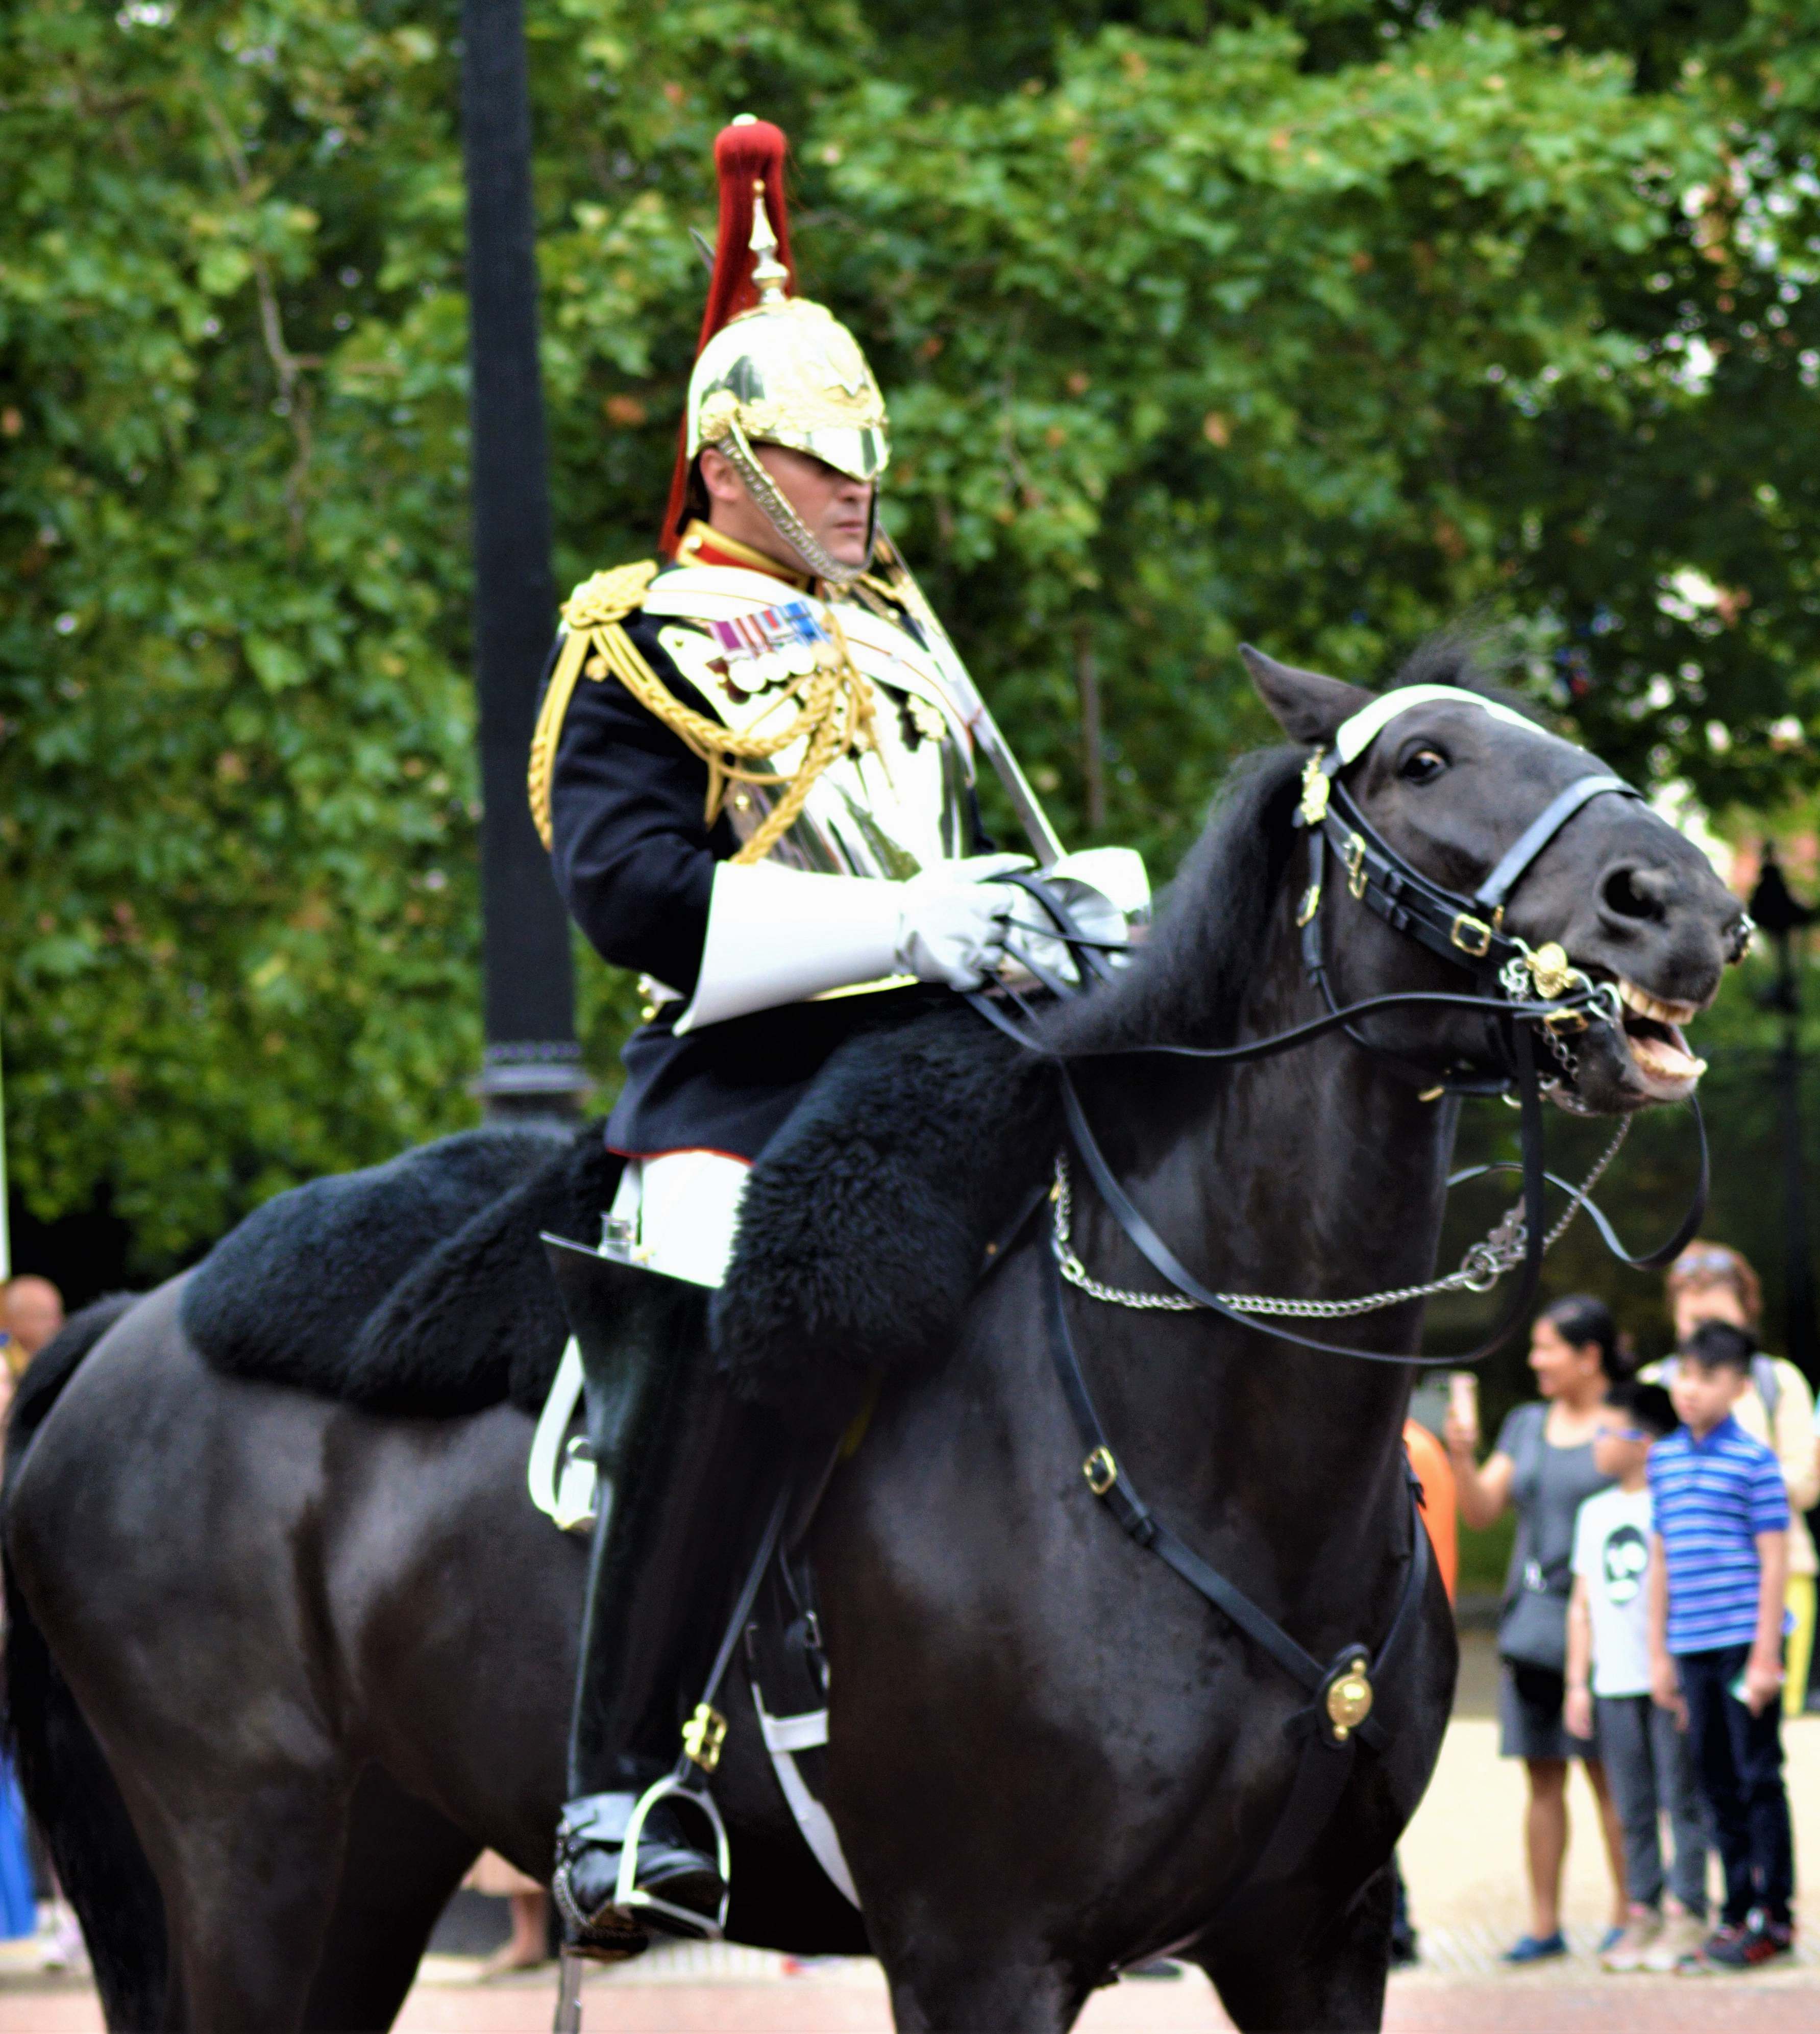 Horse Man Wearing White And Black Costume Riding On Black Horse Mammal ...